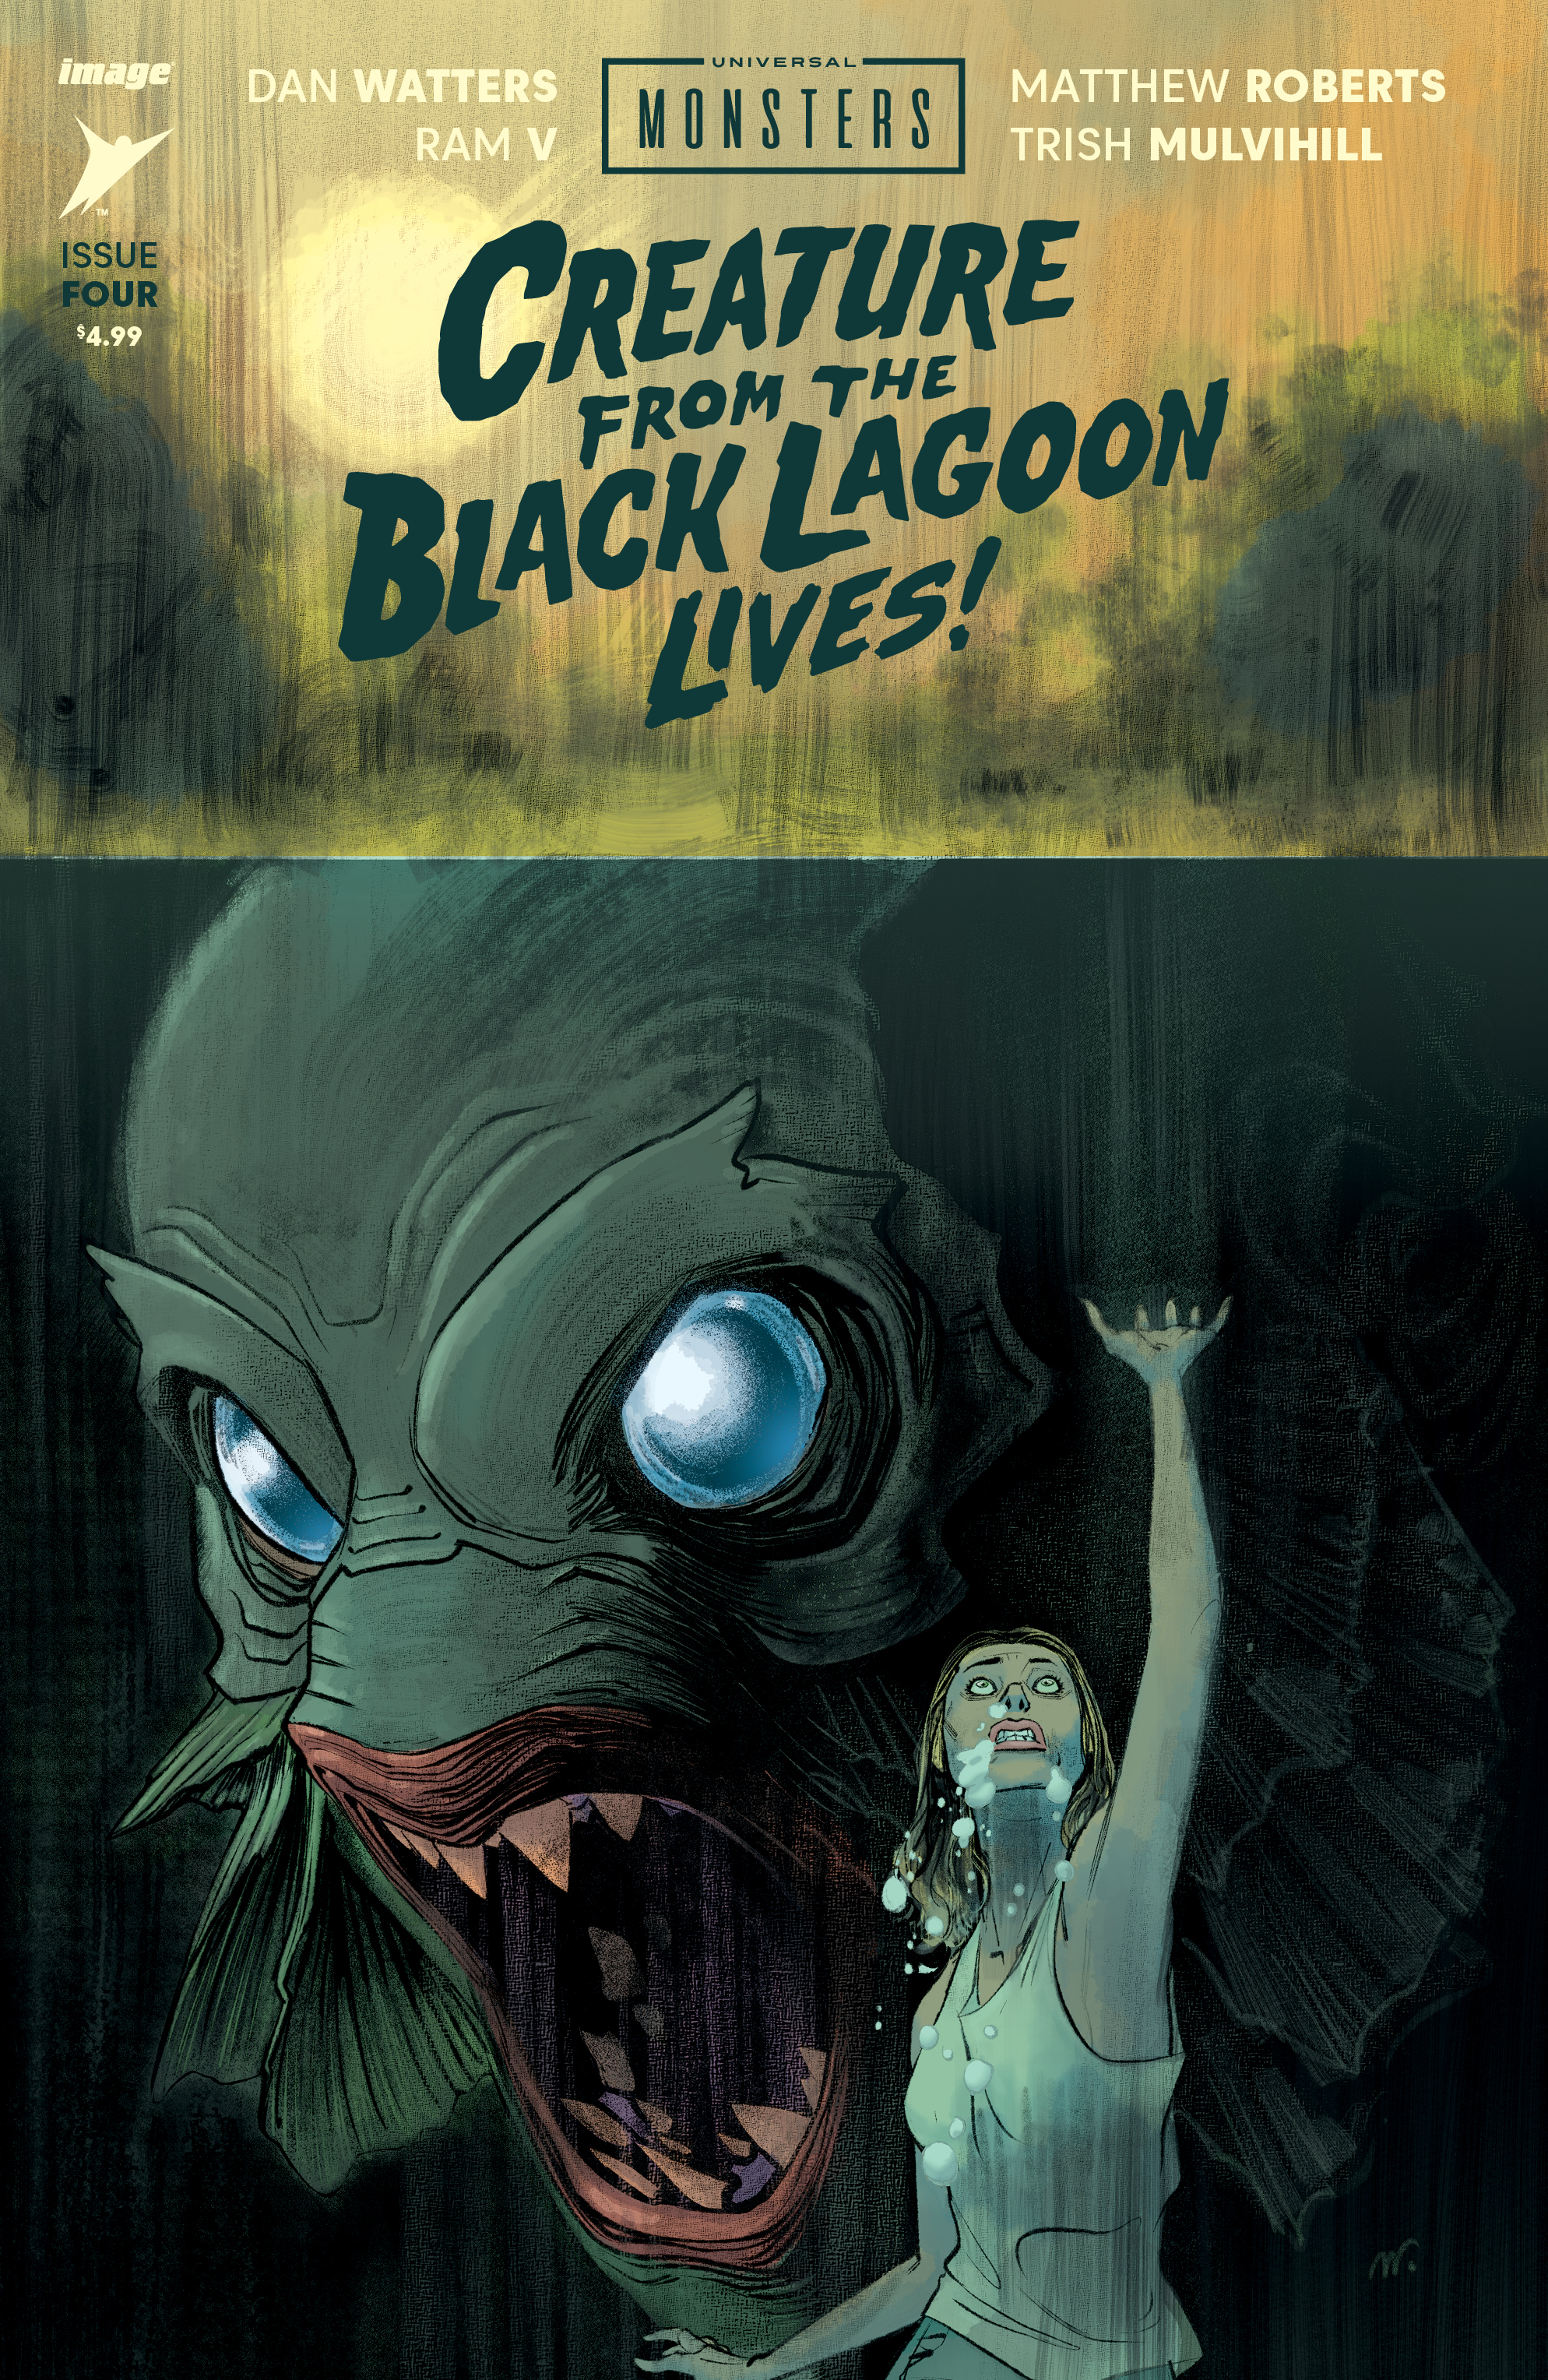 Universal Monsters the Creature from the Black Lagoon Lives #4 Cover A Matthew Roberts & Dave St (Of 4)